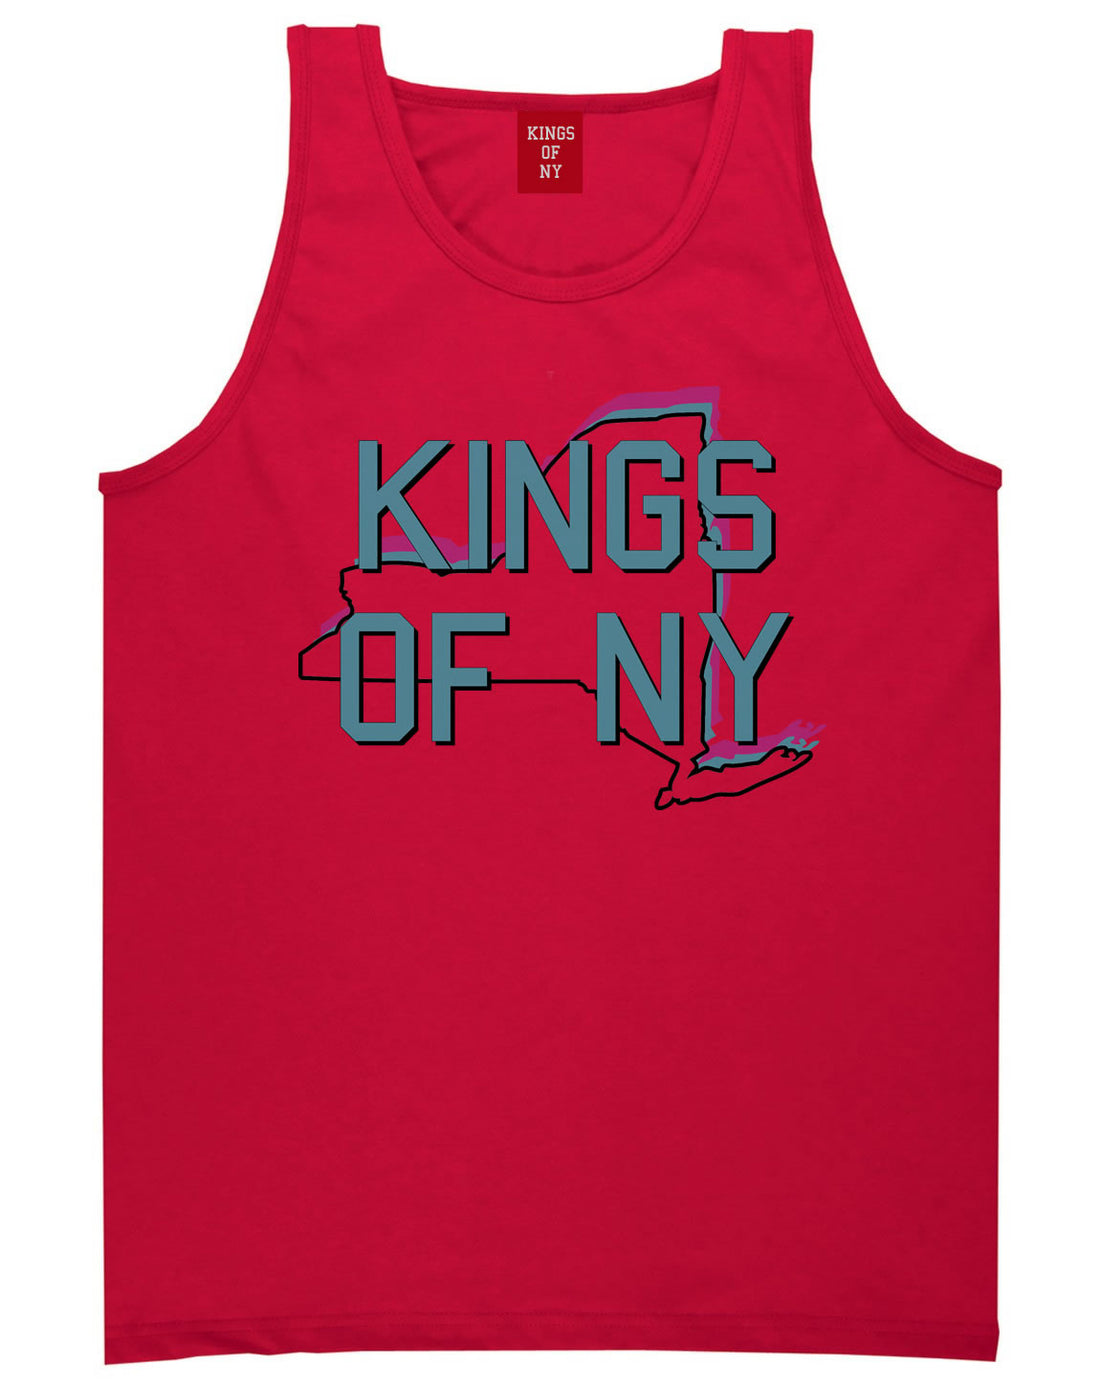 New York State Outline Tank Top in Red by Kings Of NY